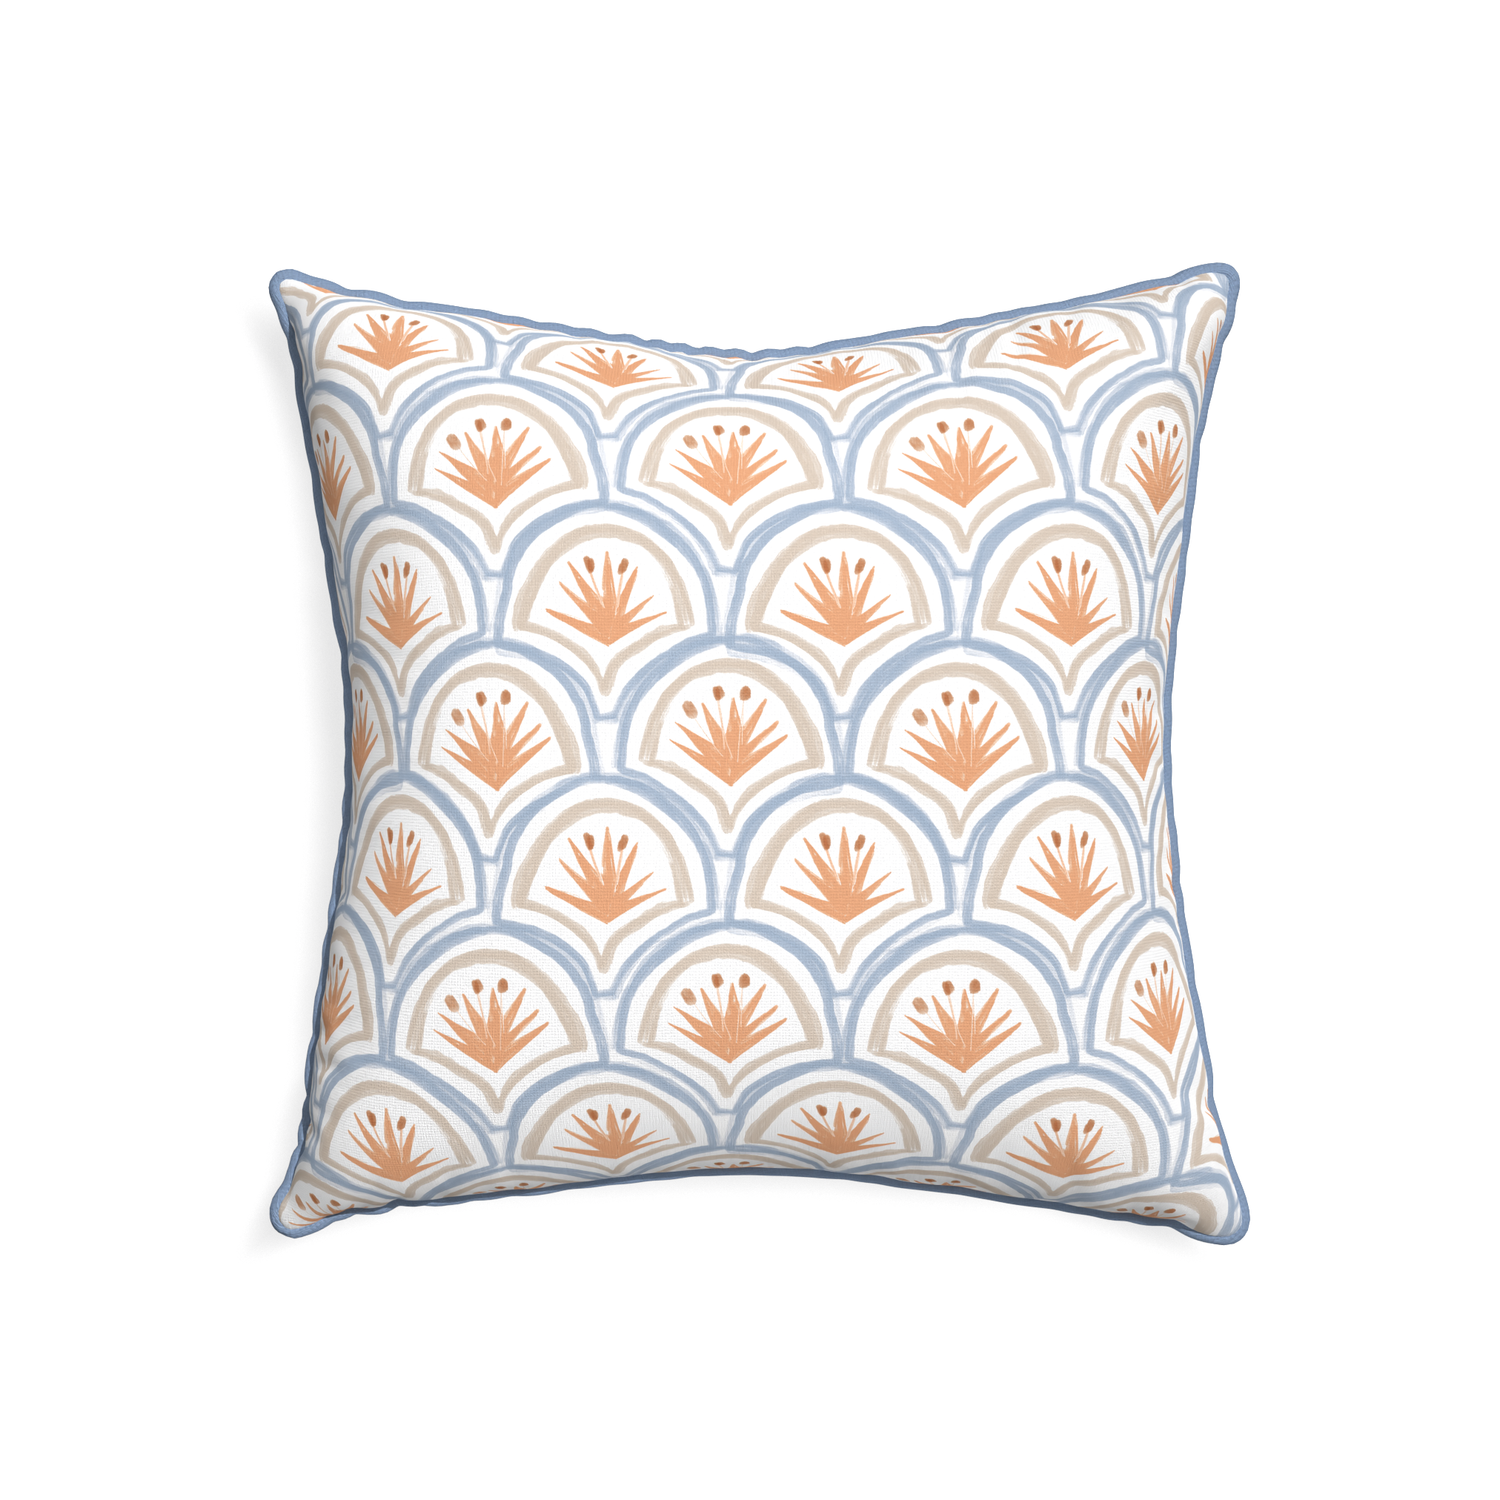 22-square thatcher apricot custom art deco palm patternpillow with sky piping on white background